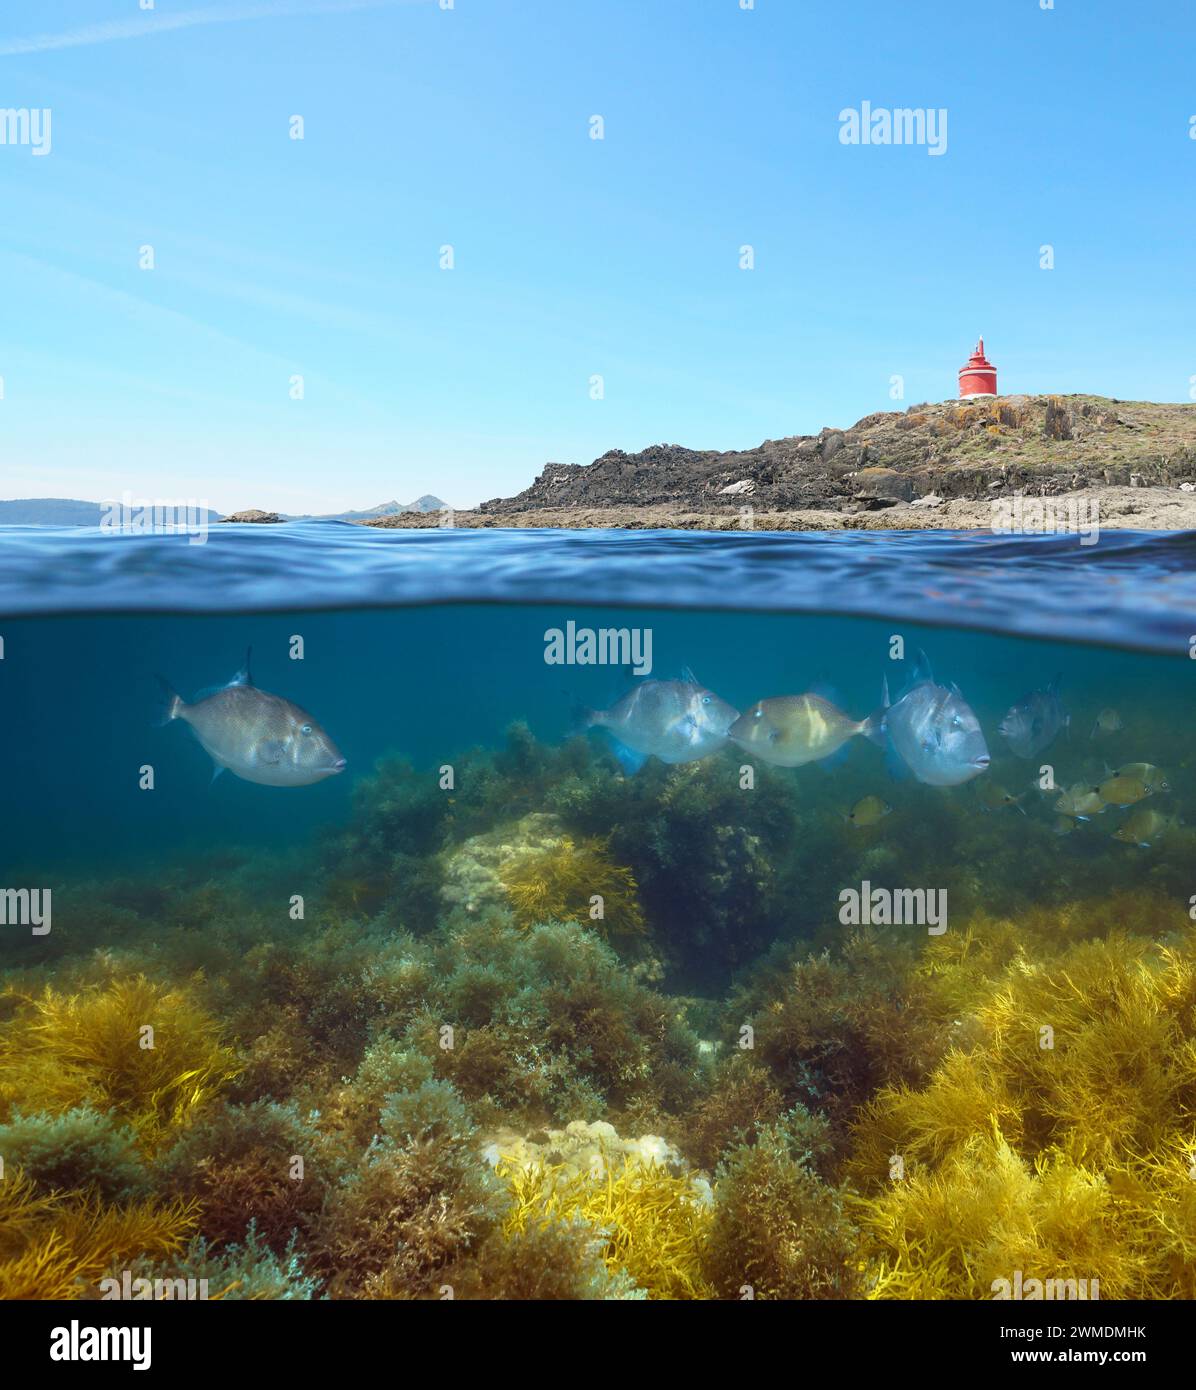 Coastline with a lighthouse and fish with seaweed underwater in the Atlantic ocean, split view over and under water surface, natural scene, Spain Stock Photo